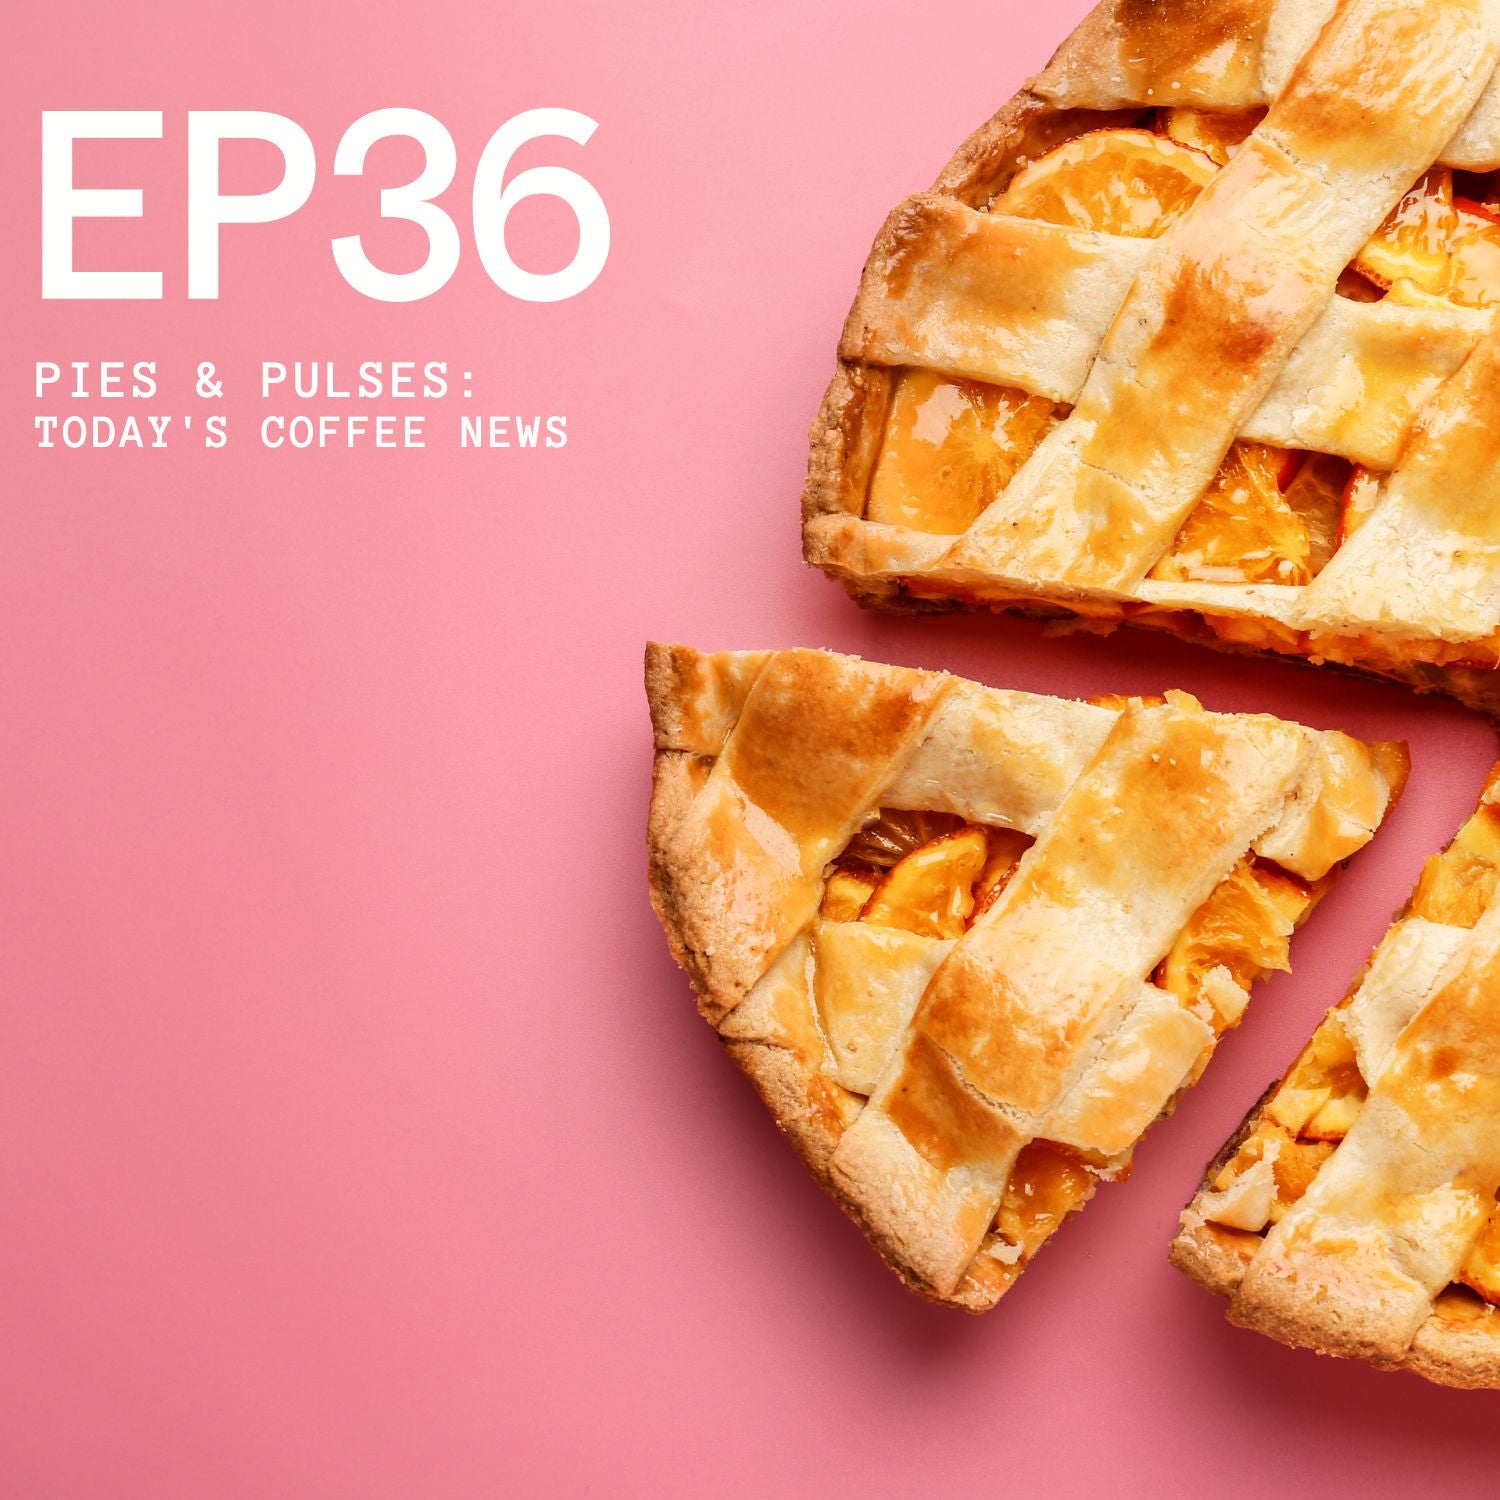 Episode 36 - Pies & Pulses: Today's Coffee News